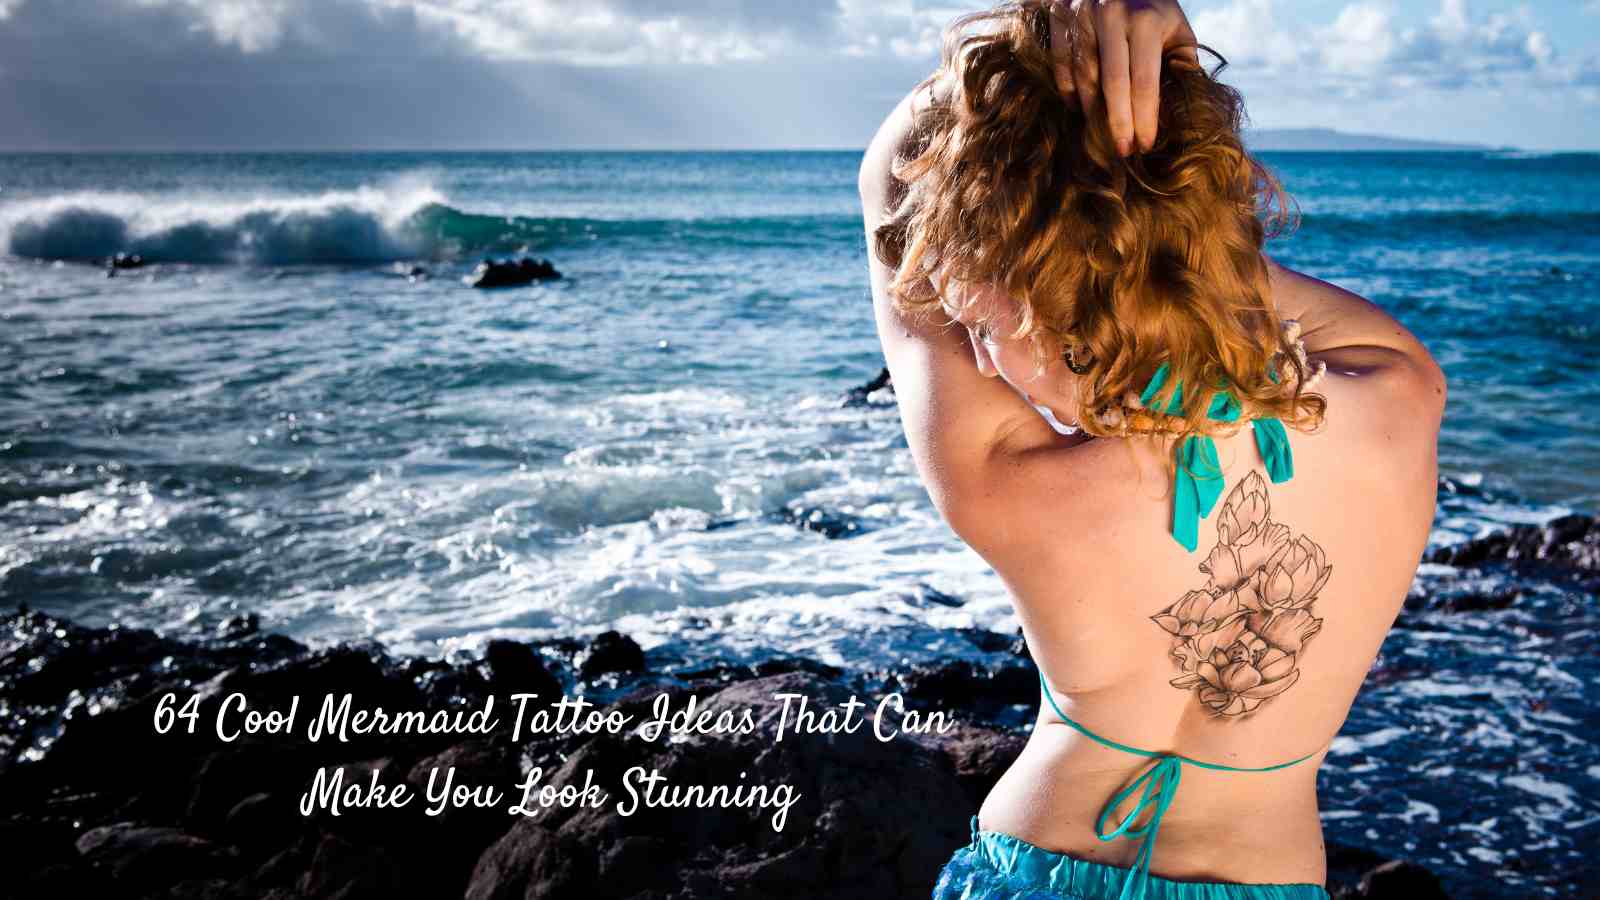 Mermaid Tattoo Ideas That Can Make You Look Stunning